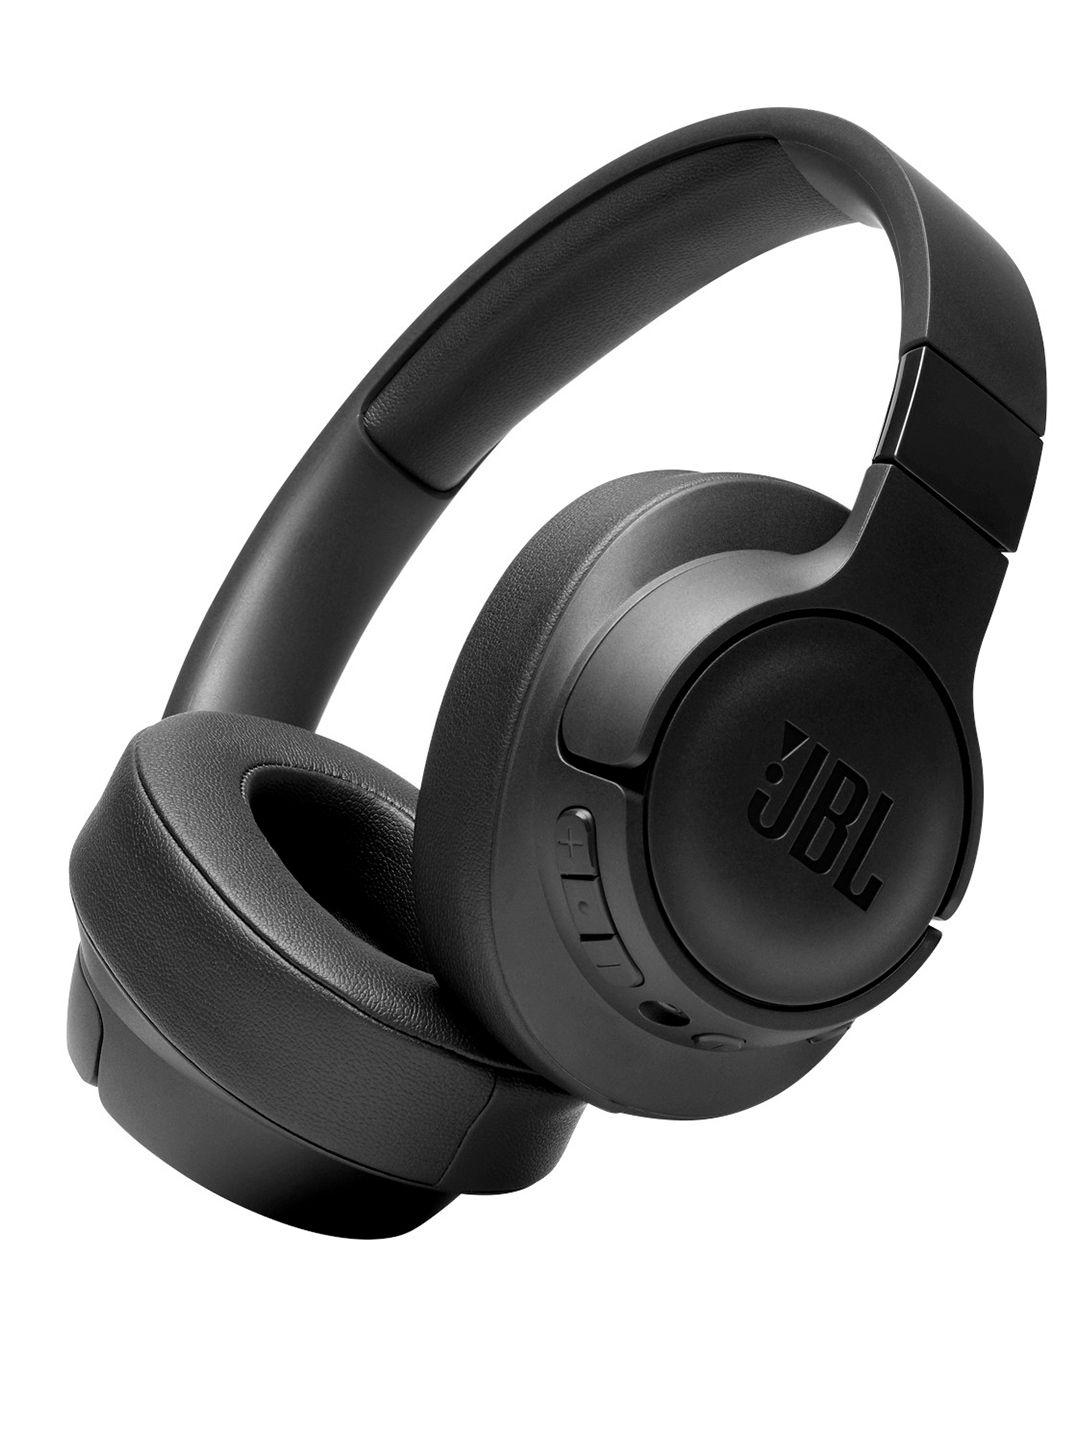 jbl tune 760nc active noise cancellation wireless over ear headphones with mic - black